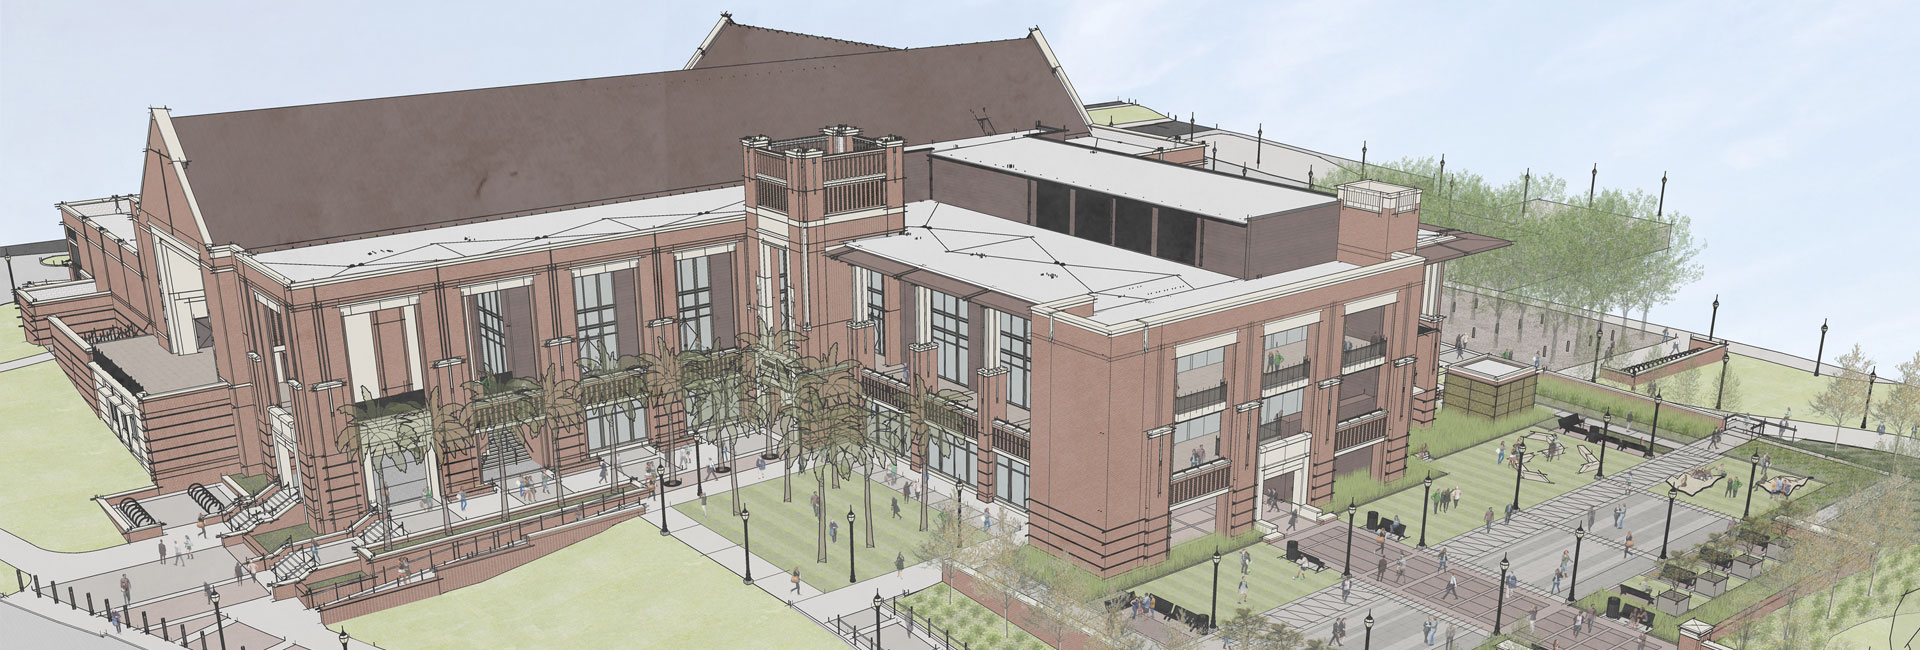 GO to FSU’S new Student Union draws from the past while rising toward the future